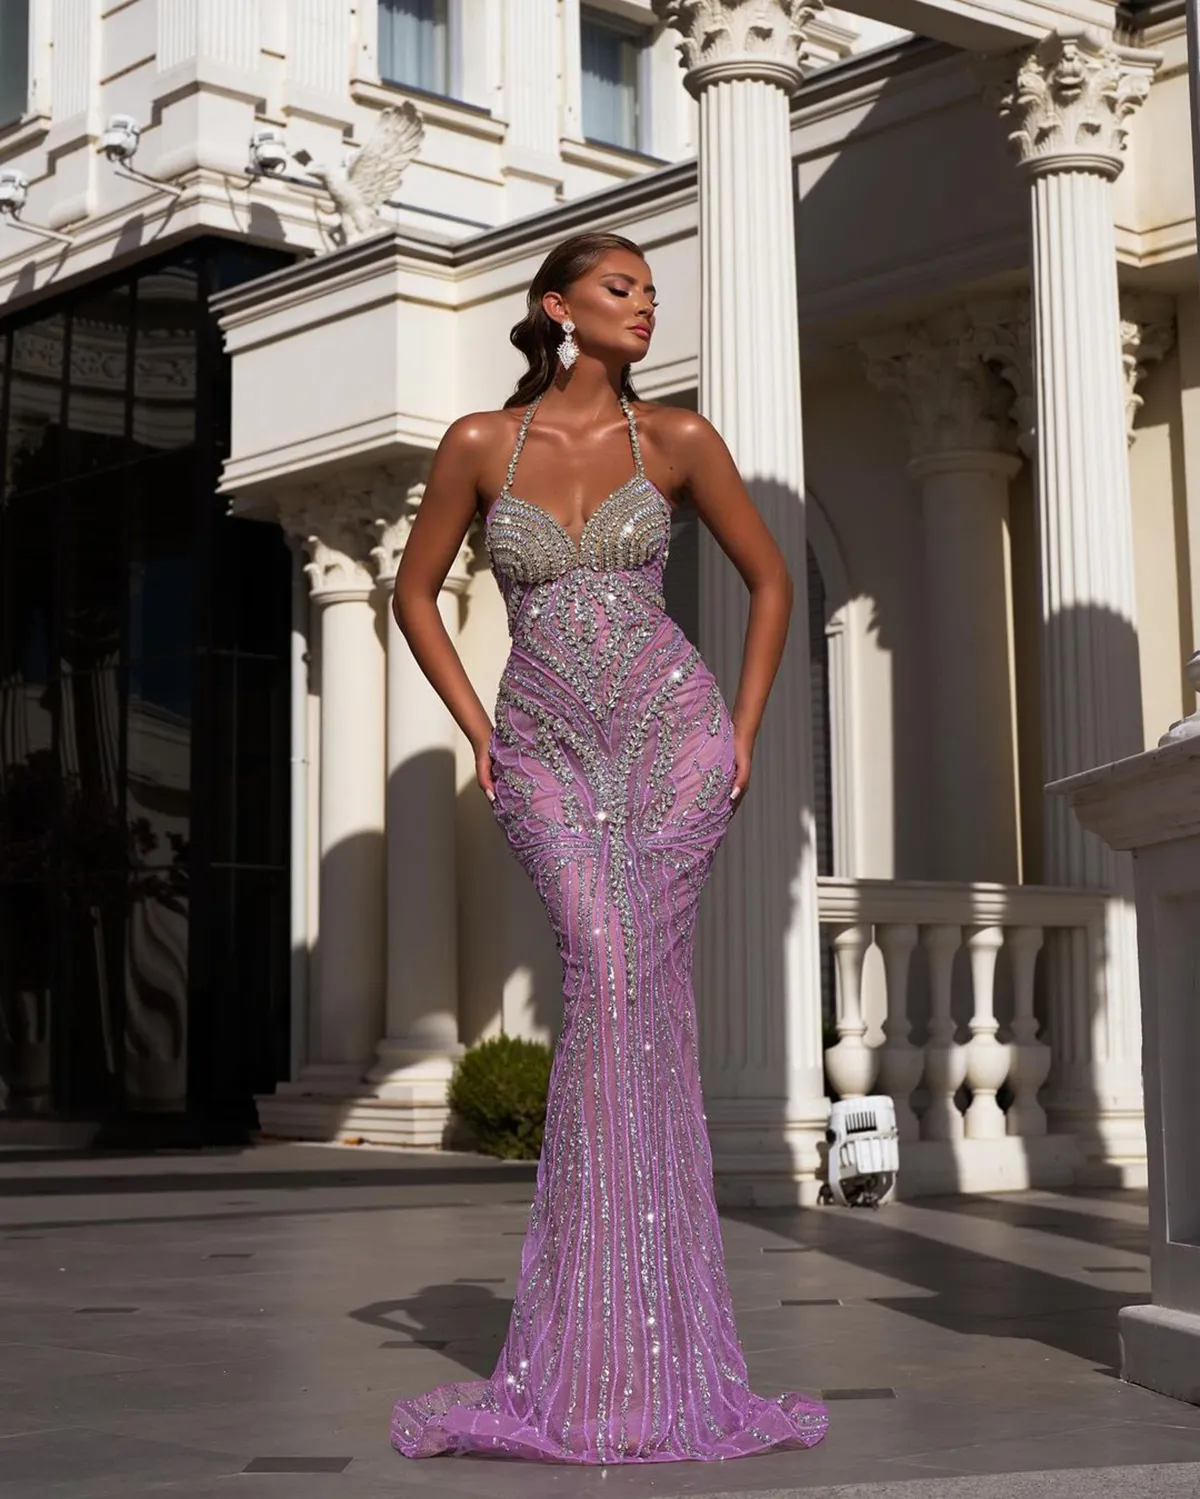 Crystal Halter Mermaid Evening Dresses Sexy Sleeveless Beading Prom Dress Glitter Floor Length Formal Party Gowns